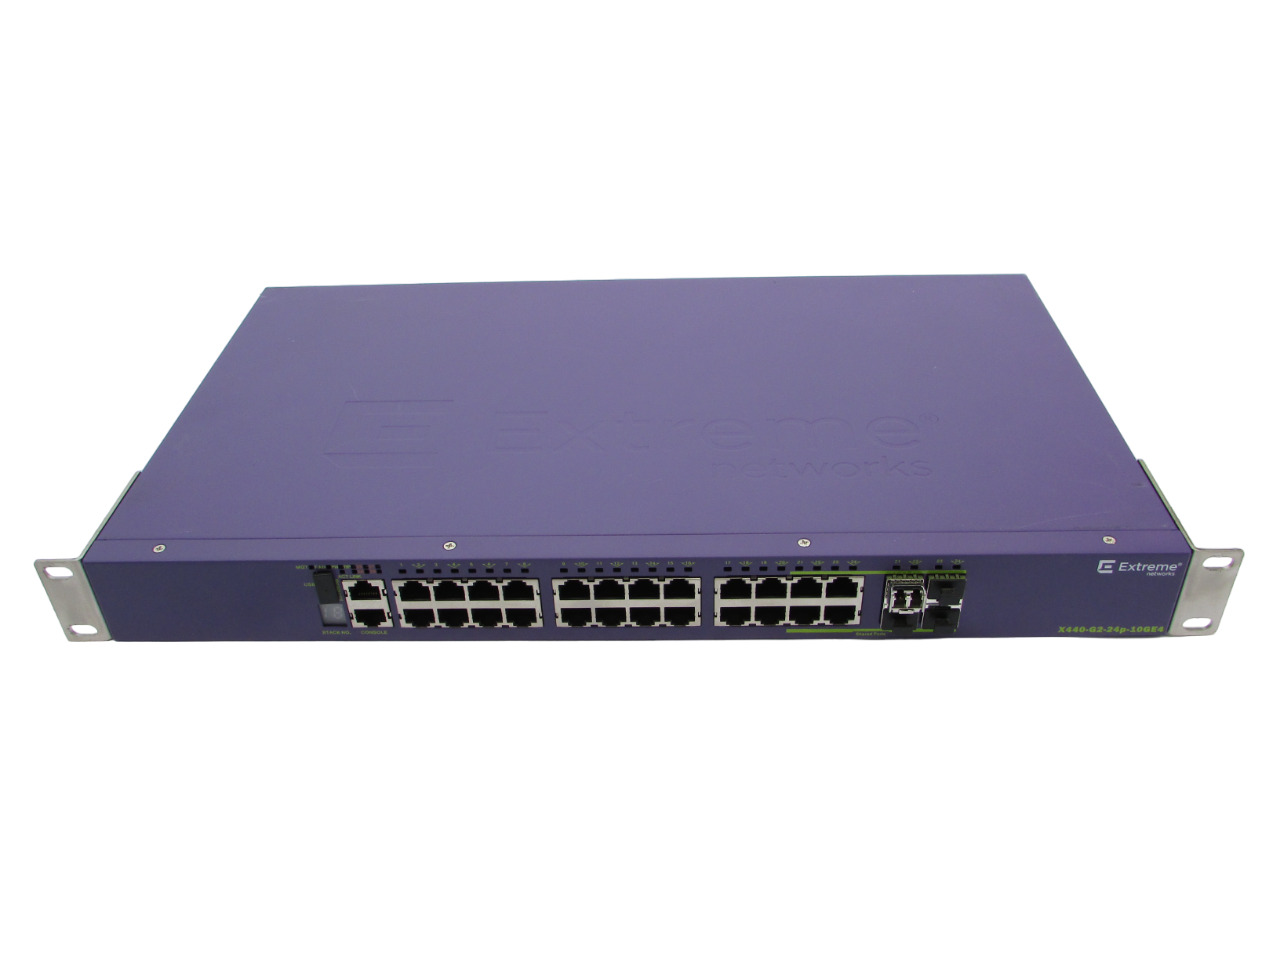 Extreme Networks X440-G2-24p-10GE4 24 x 10/100/1000BASE-T PoE Plus Switch